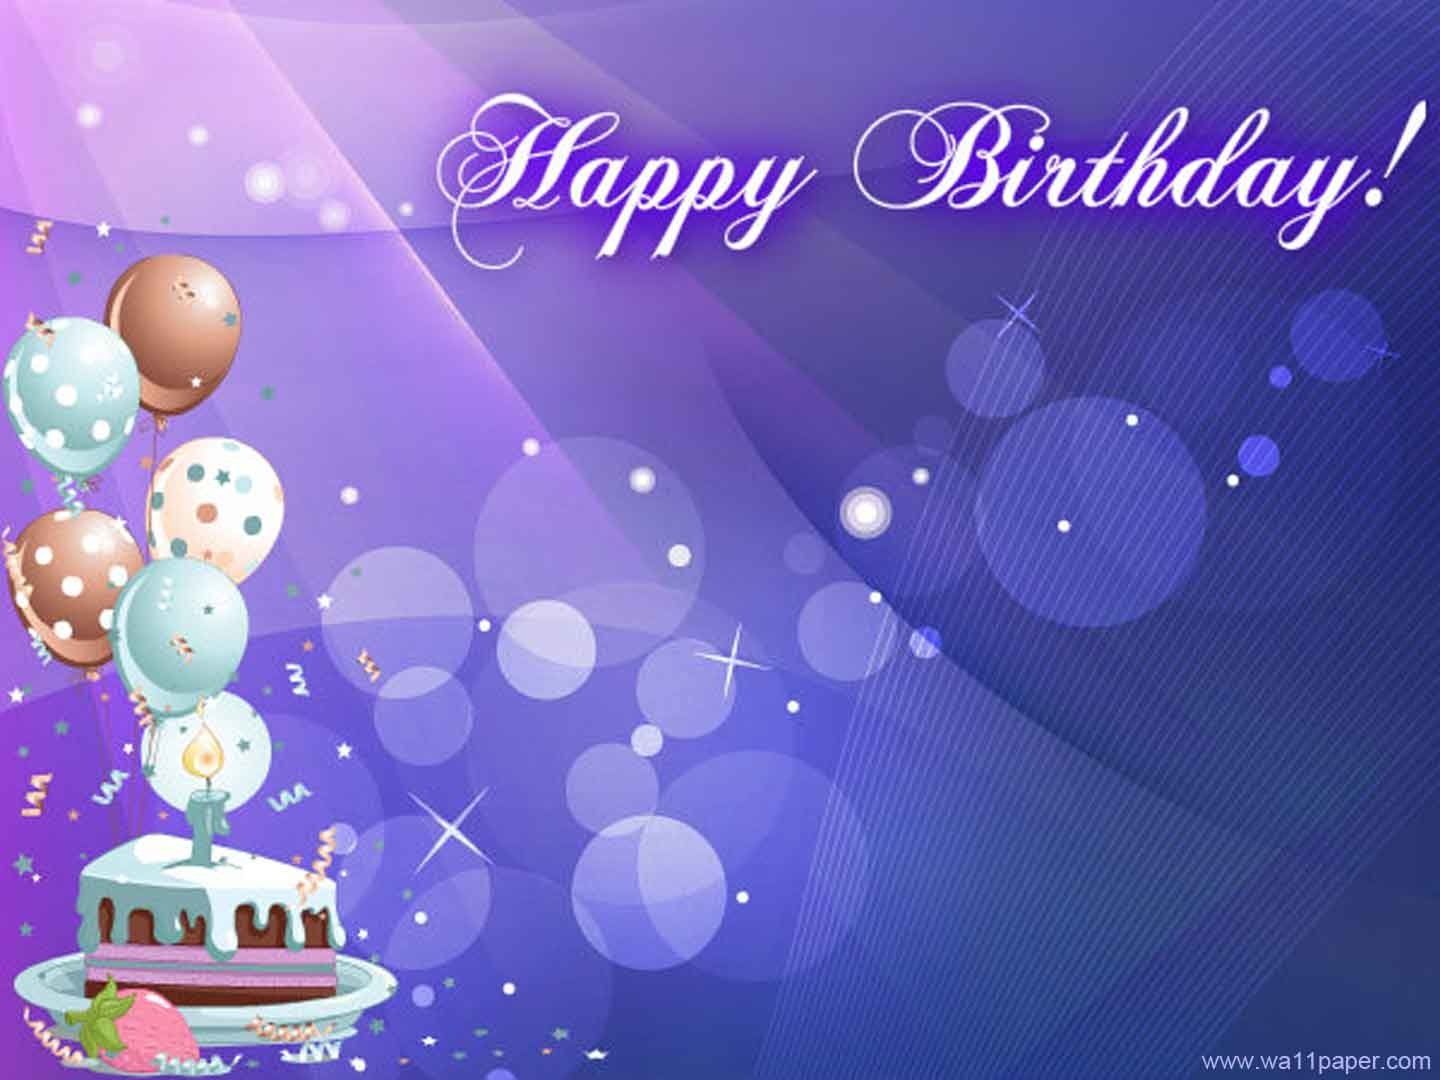 Happy Birthday Backgrounds Wallpapers - Happy Birthday Background Hd - HD Wallpaper 